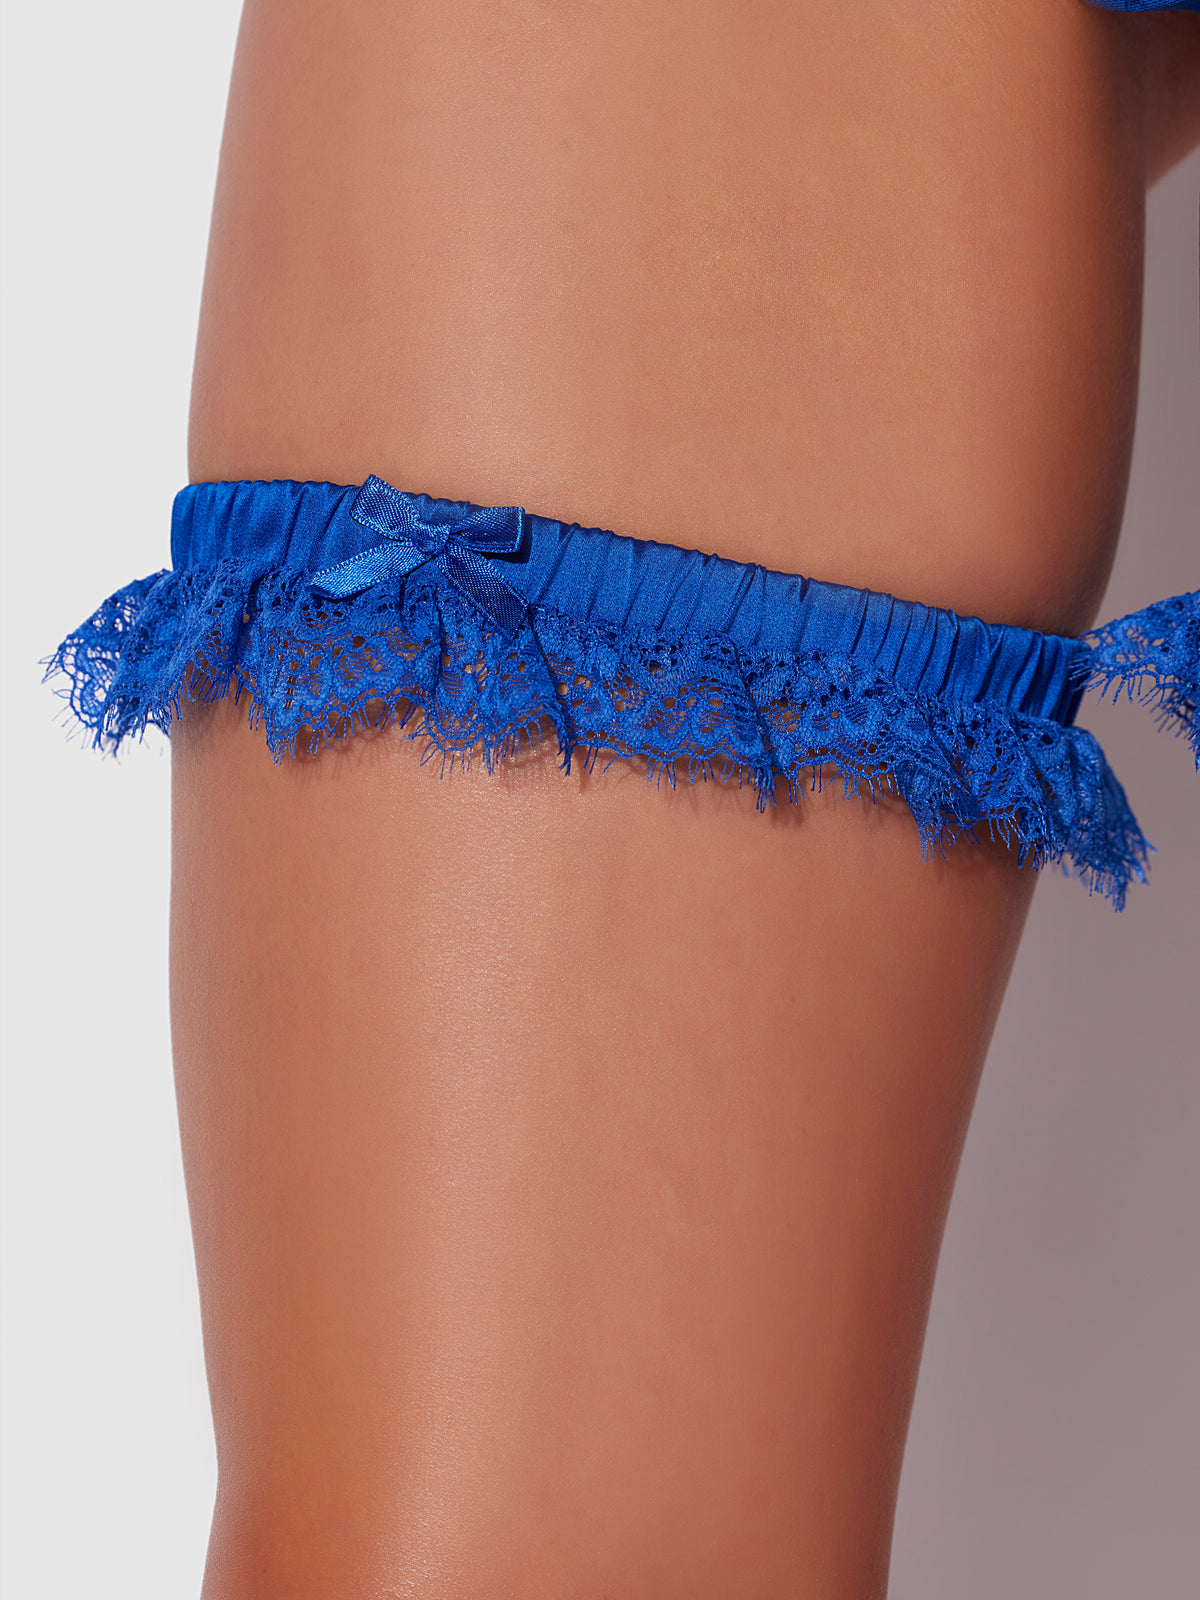 Adelaide Satin & Lace Thigh Garters - Frederick's of Hollywood